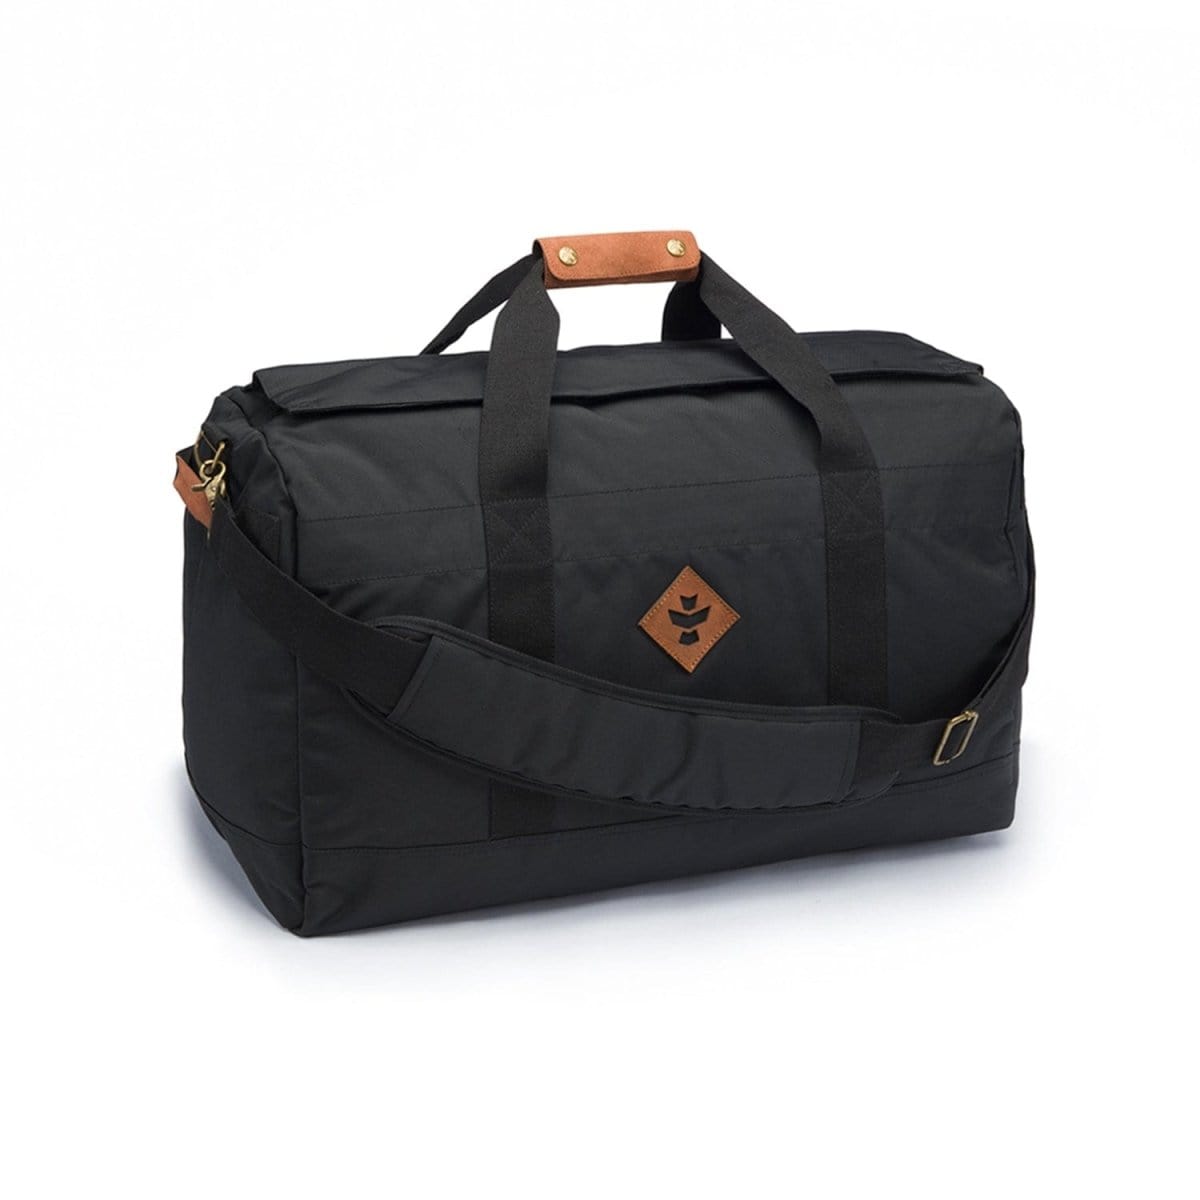 Revelry Supply Travel Bag Black The Around-Towner - Smell Proof Medium Duffle